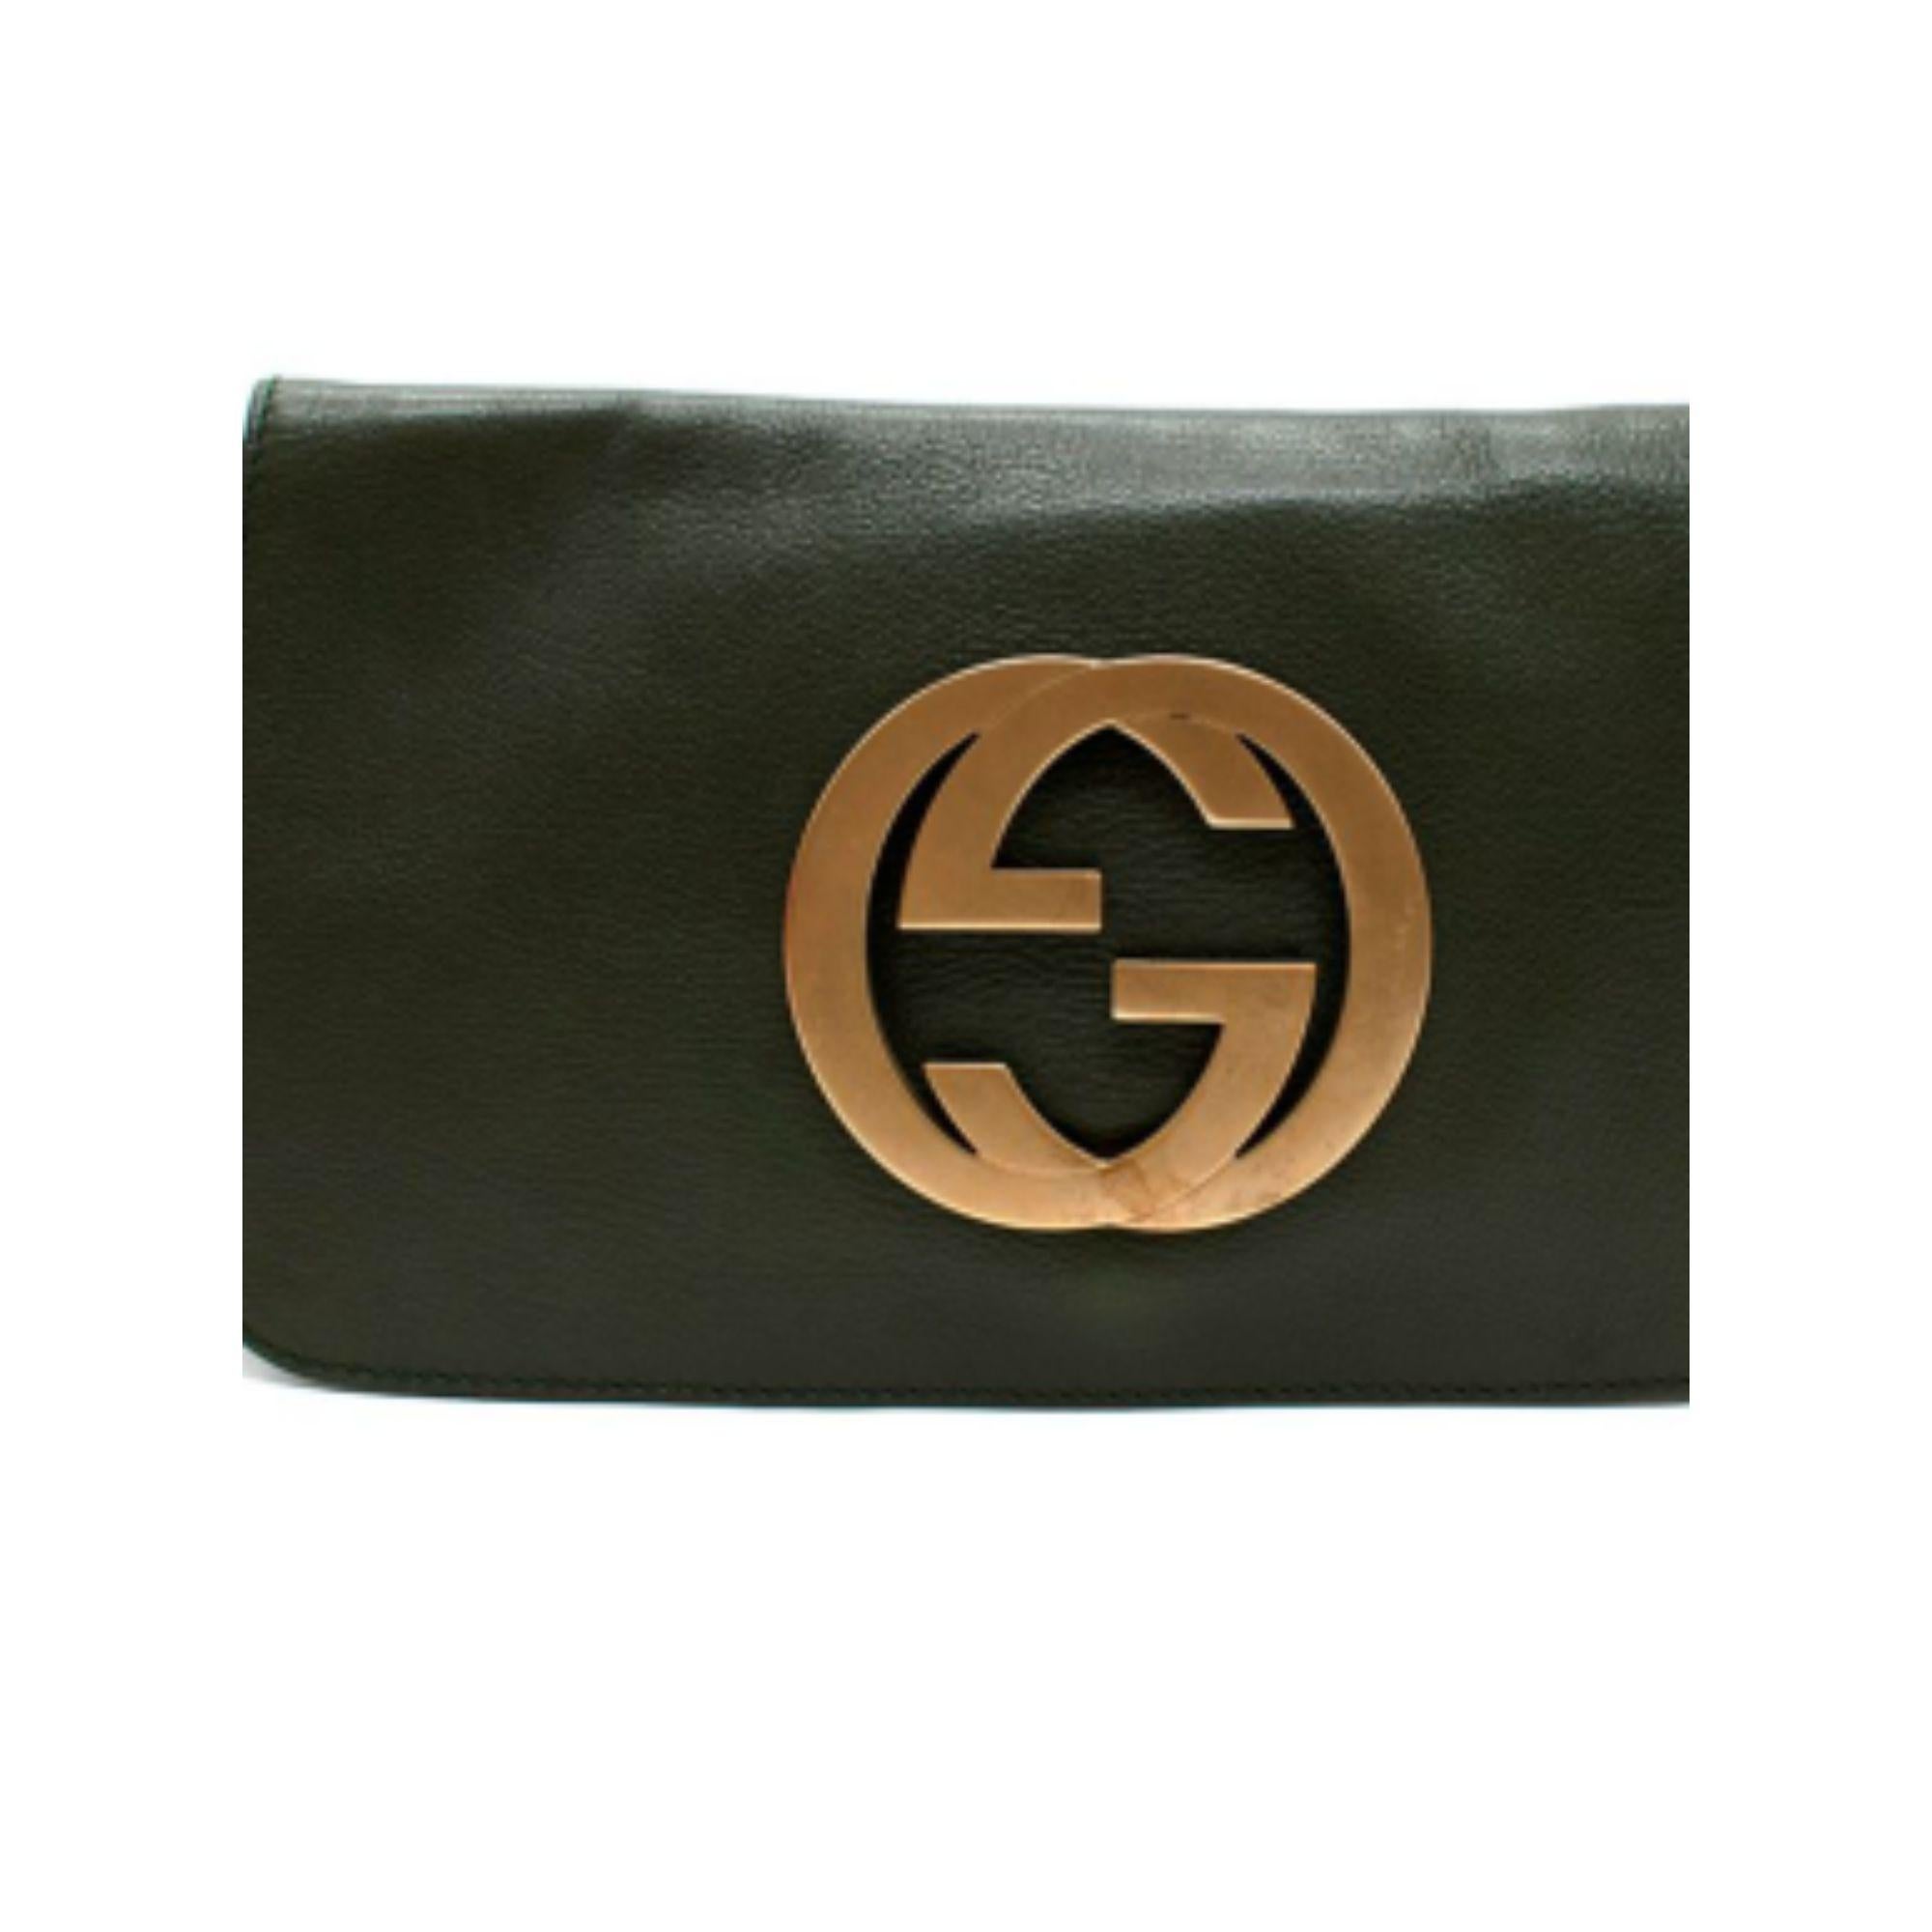 Gucci Green Vintage Blondie Leather Shoulder Bag

- Thin adjustable shoulder strap
- Signature 'GG' logo on flap
- Button flap fastening
- One main compartment
- One zipped pocket

Material
Leather

Made in Italy

9.5/10 Excellent condition

PLEASE